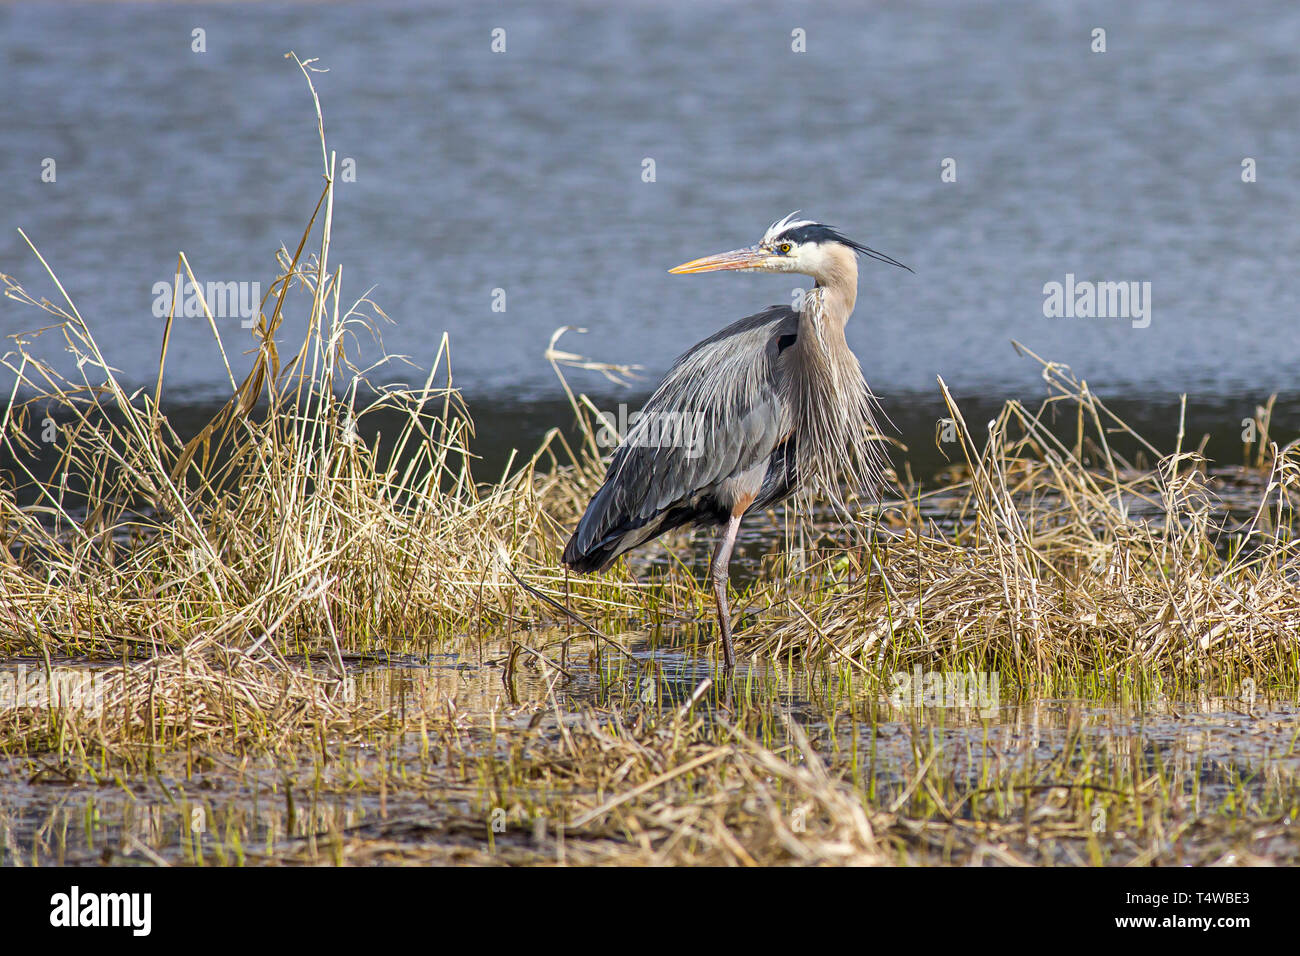 A large great blue heron stands in a marsh area in Hauser, Idaho. Stock Photo